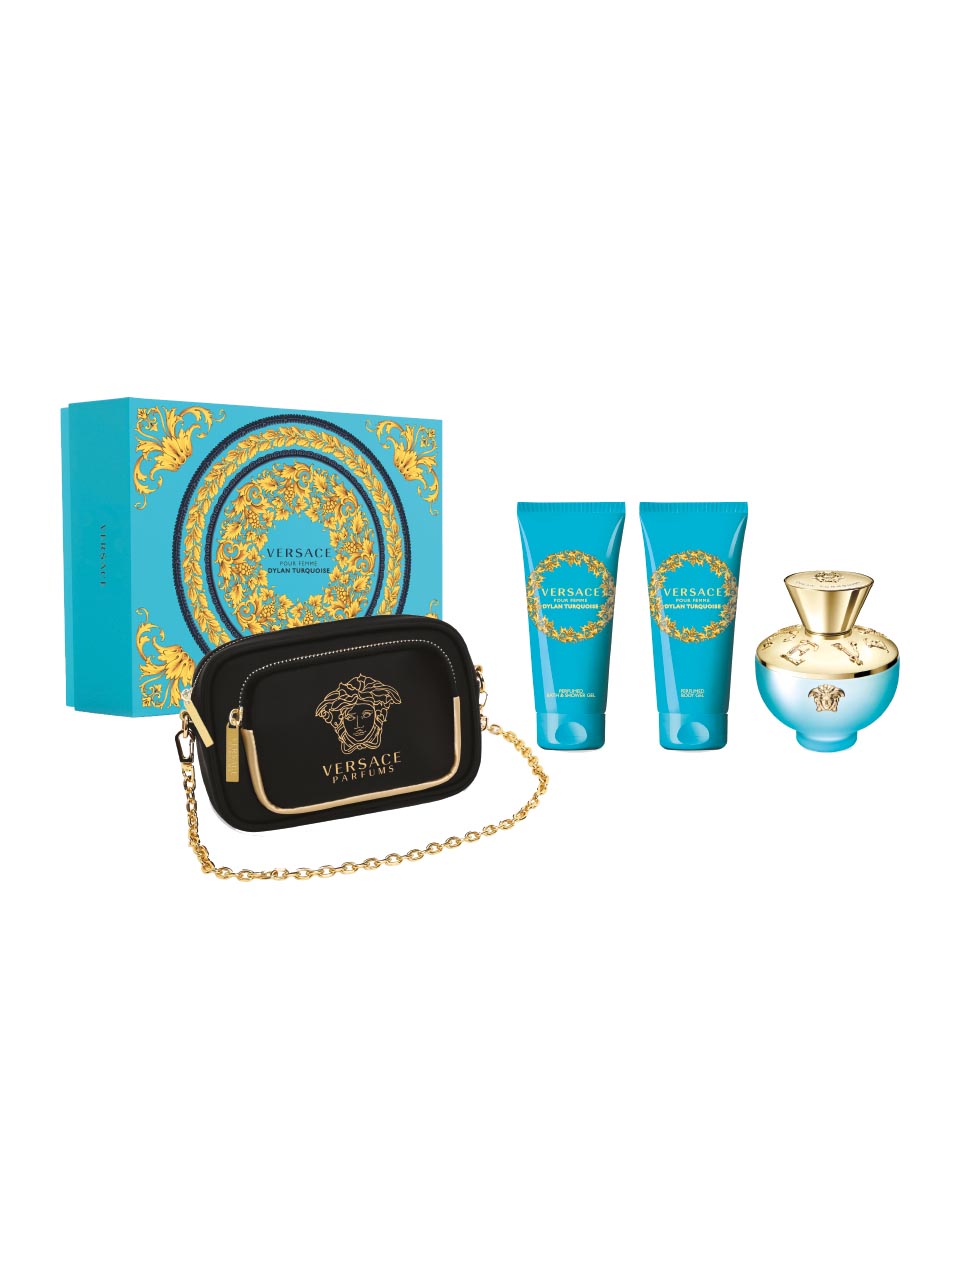 Versace pour femme Dylan Turquoise Set/EdT 100 ml + Show 100 ml + B Gel 100 ml + Clutch null - onesize - 1